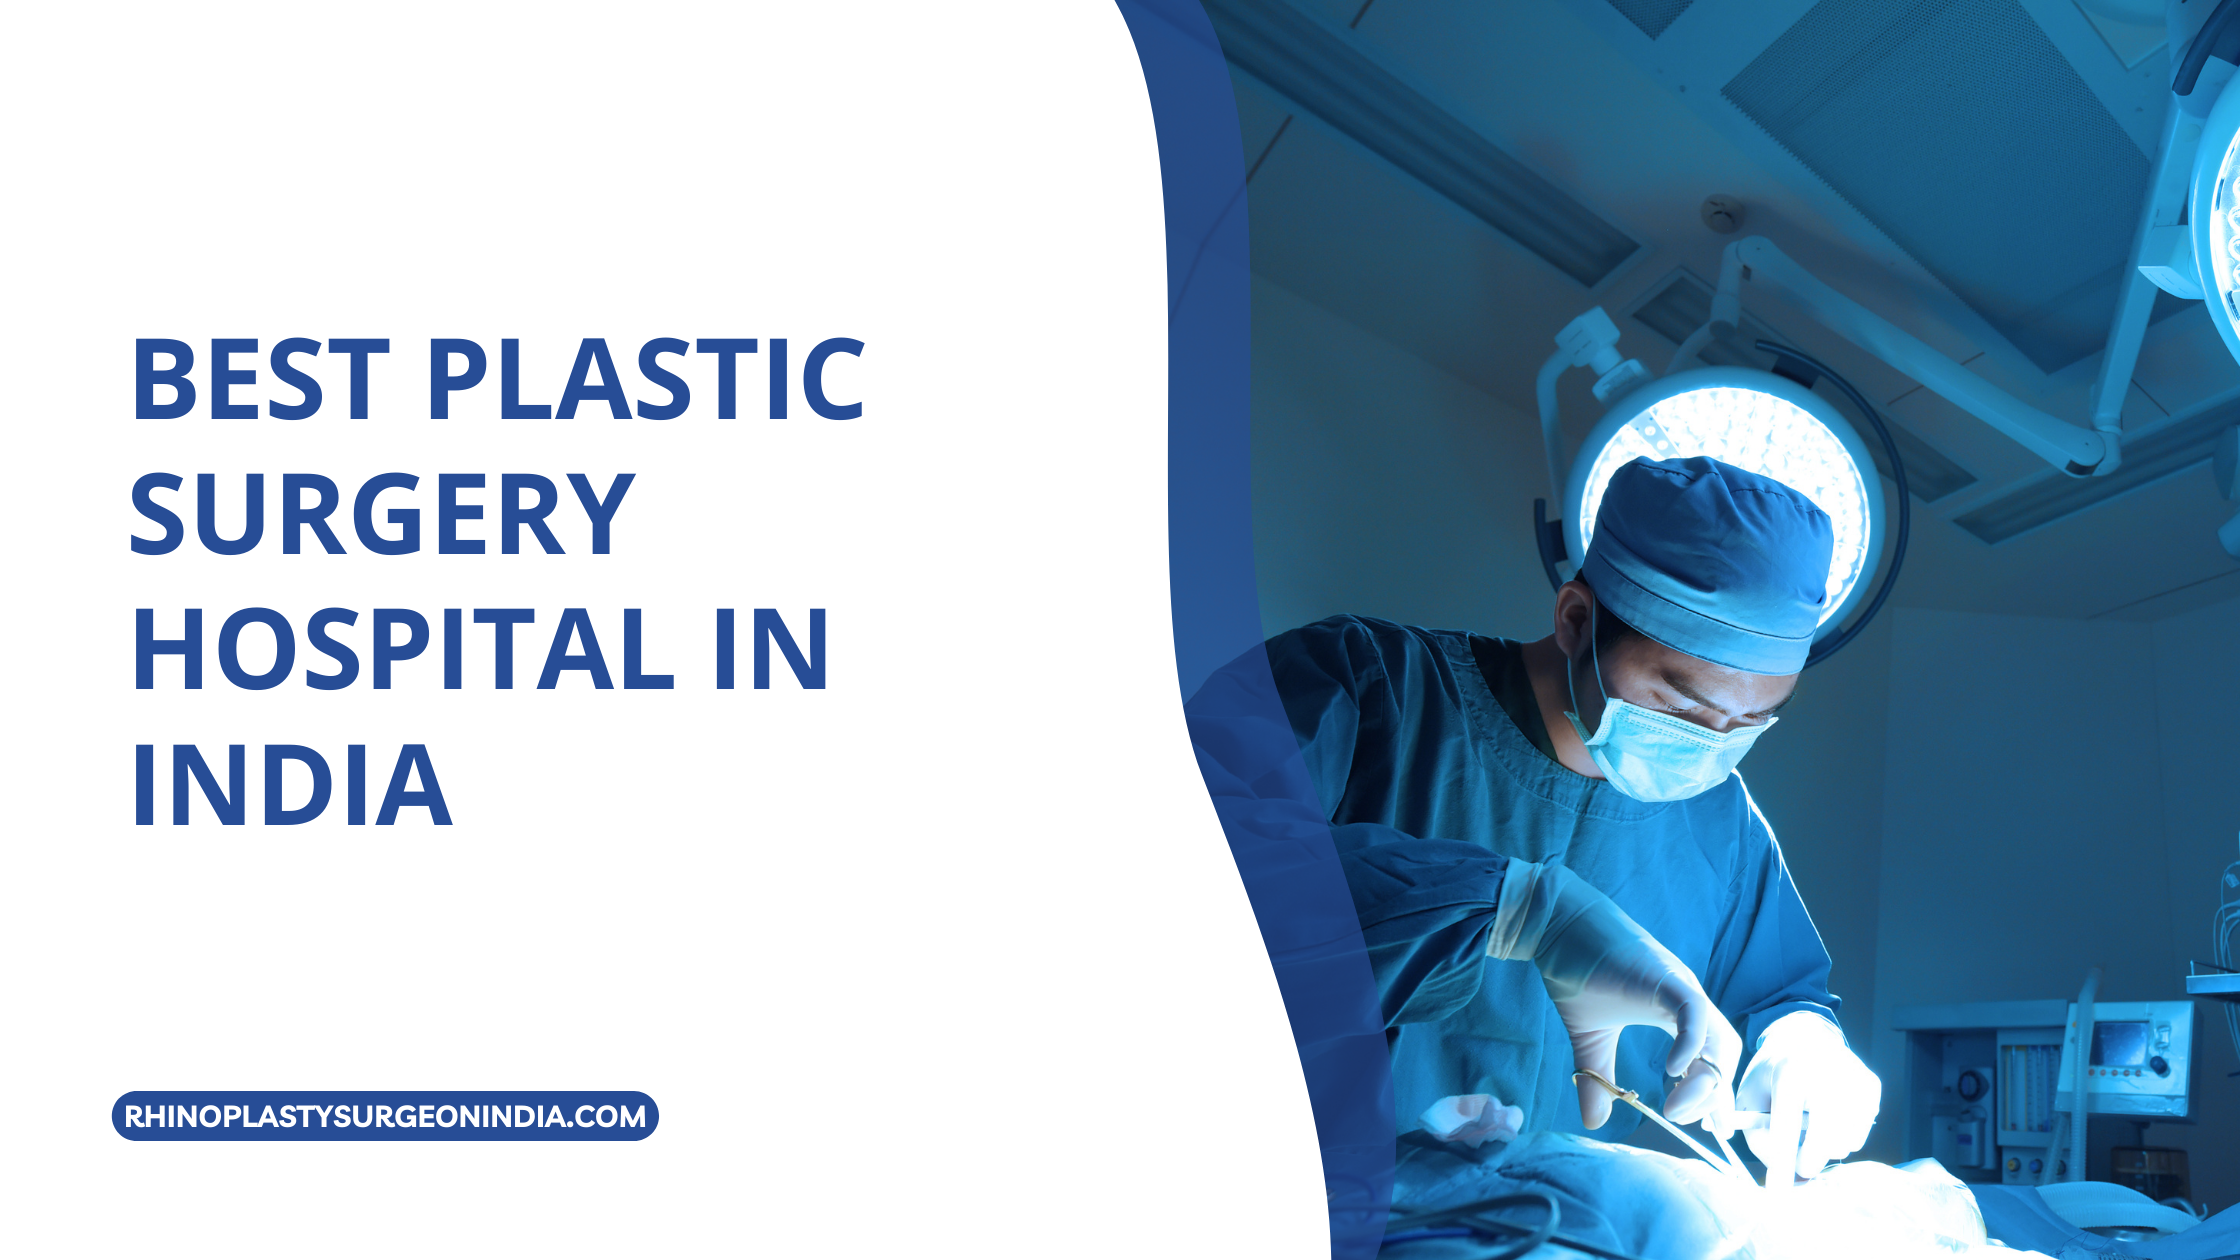 Best plastic surgery hospital in India